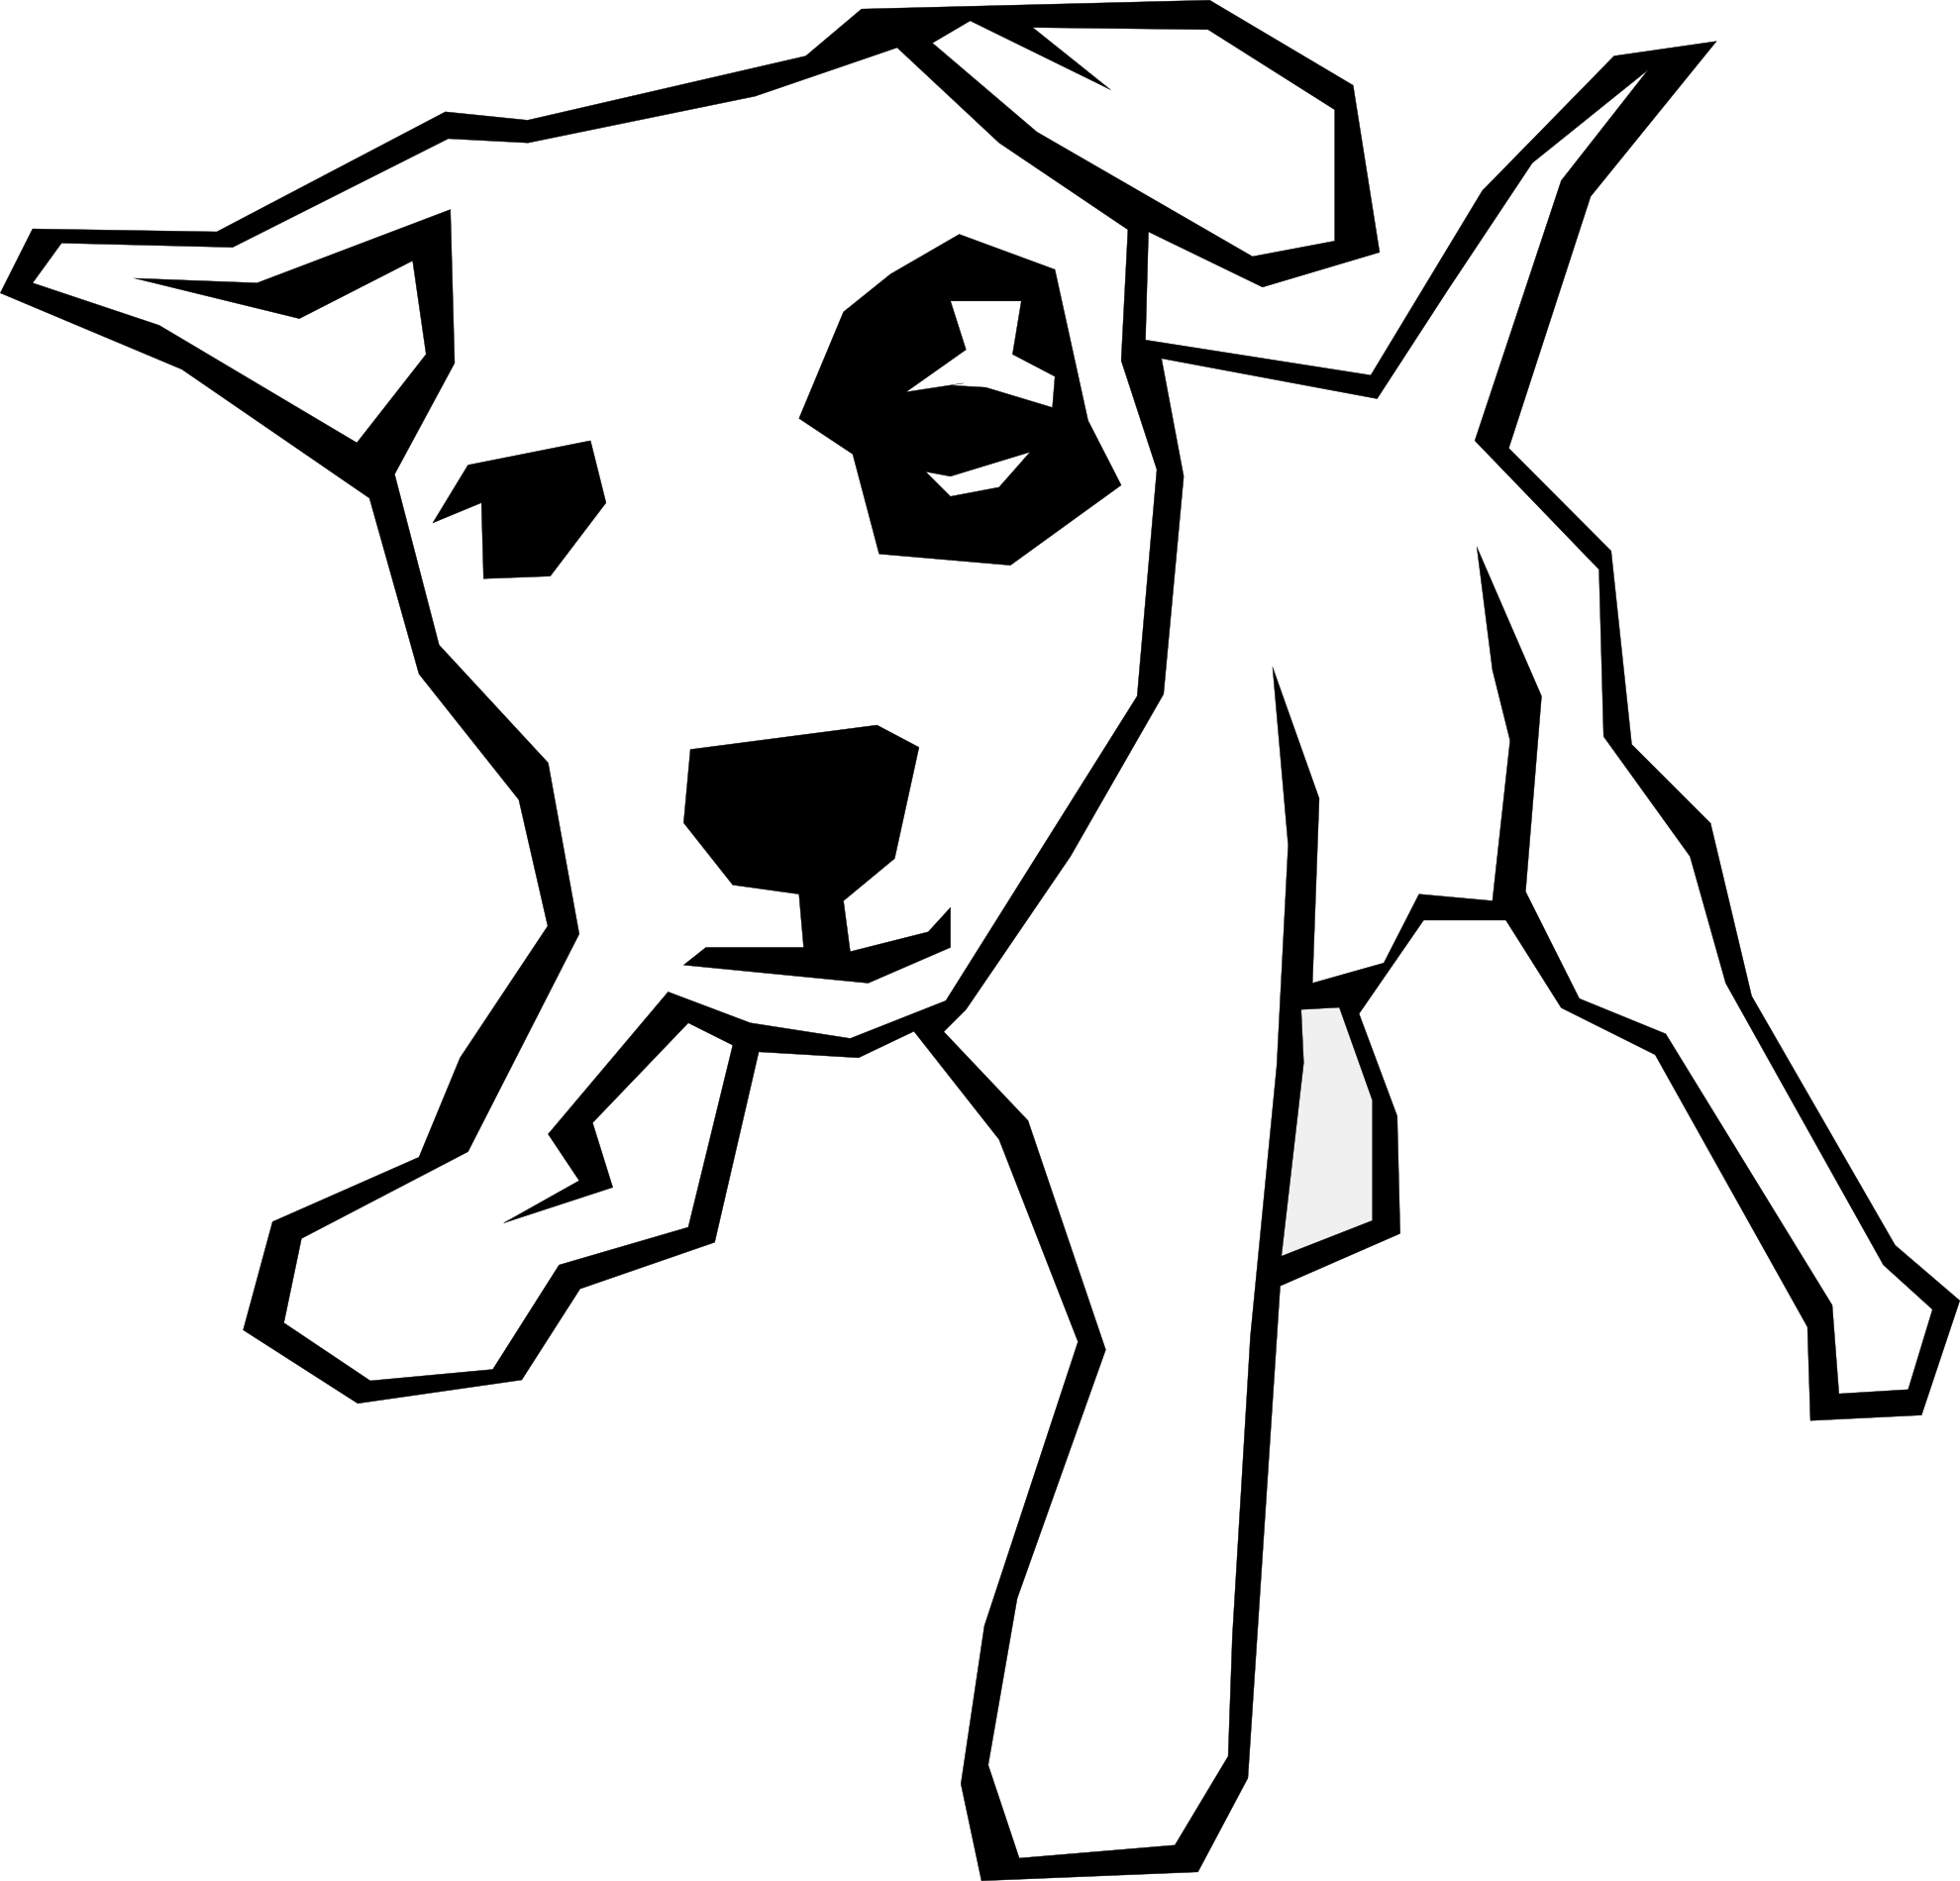 dog simple drawing 5 black white line art scalable vector graphics 